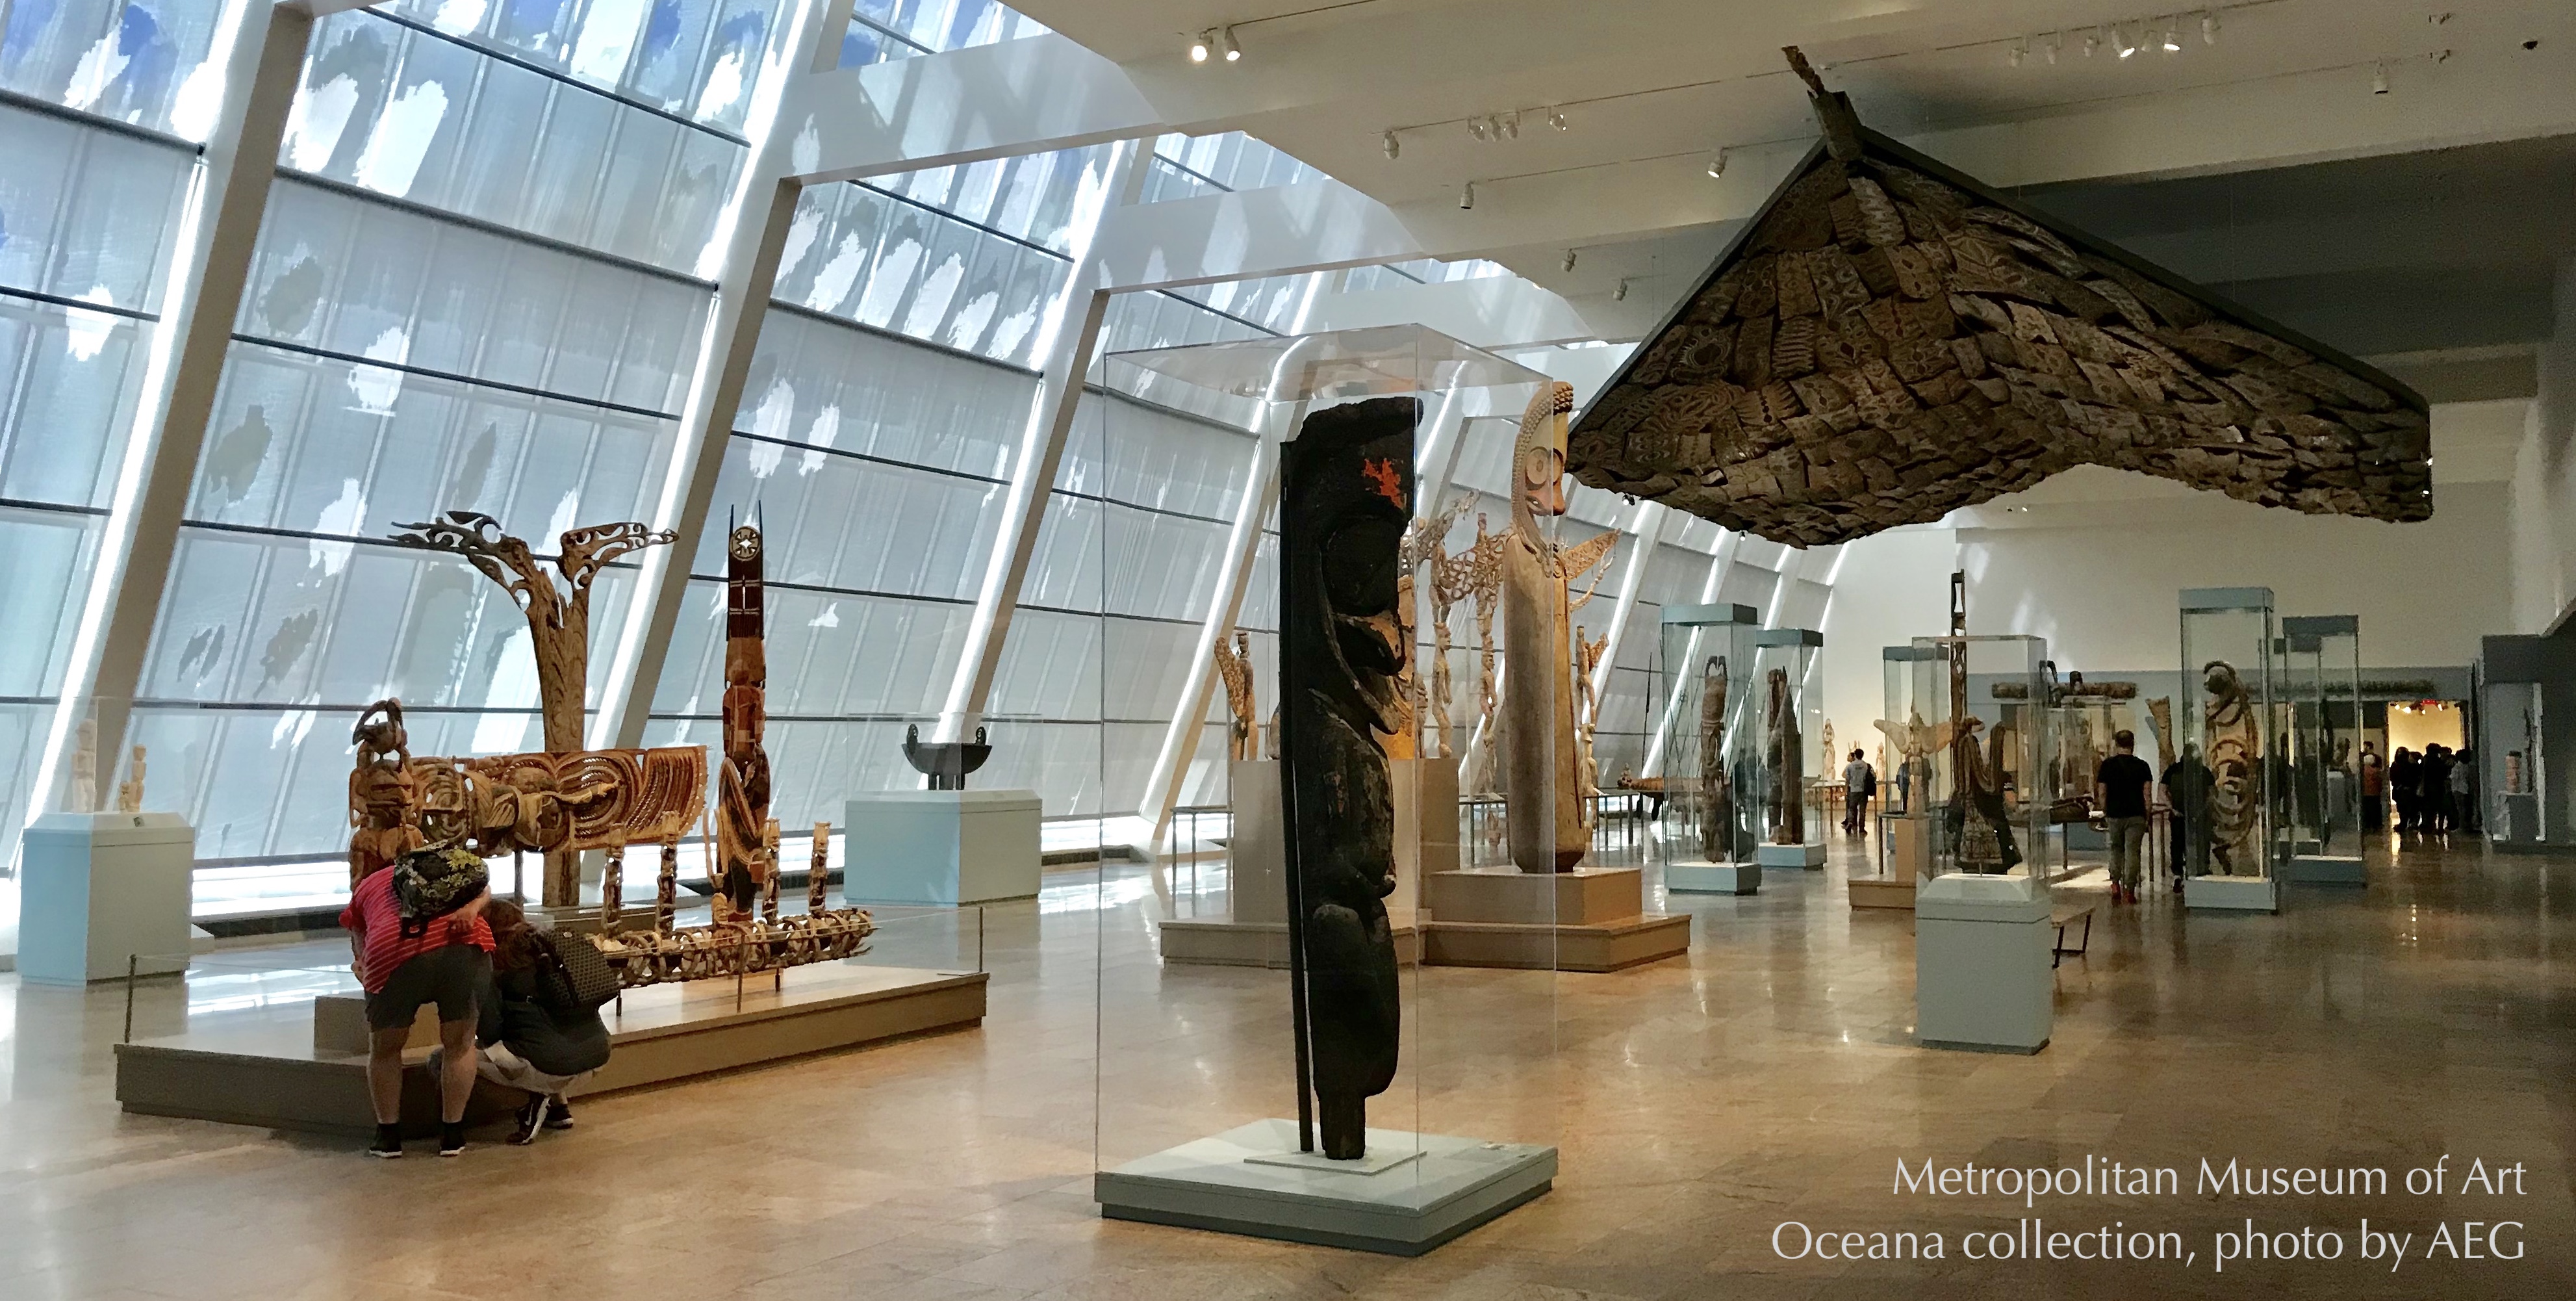 Oceana collection in the Metropolitan Museum of New York City, photo by A.E. Graves